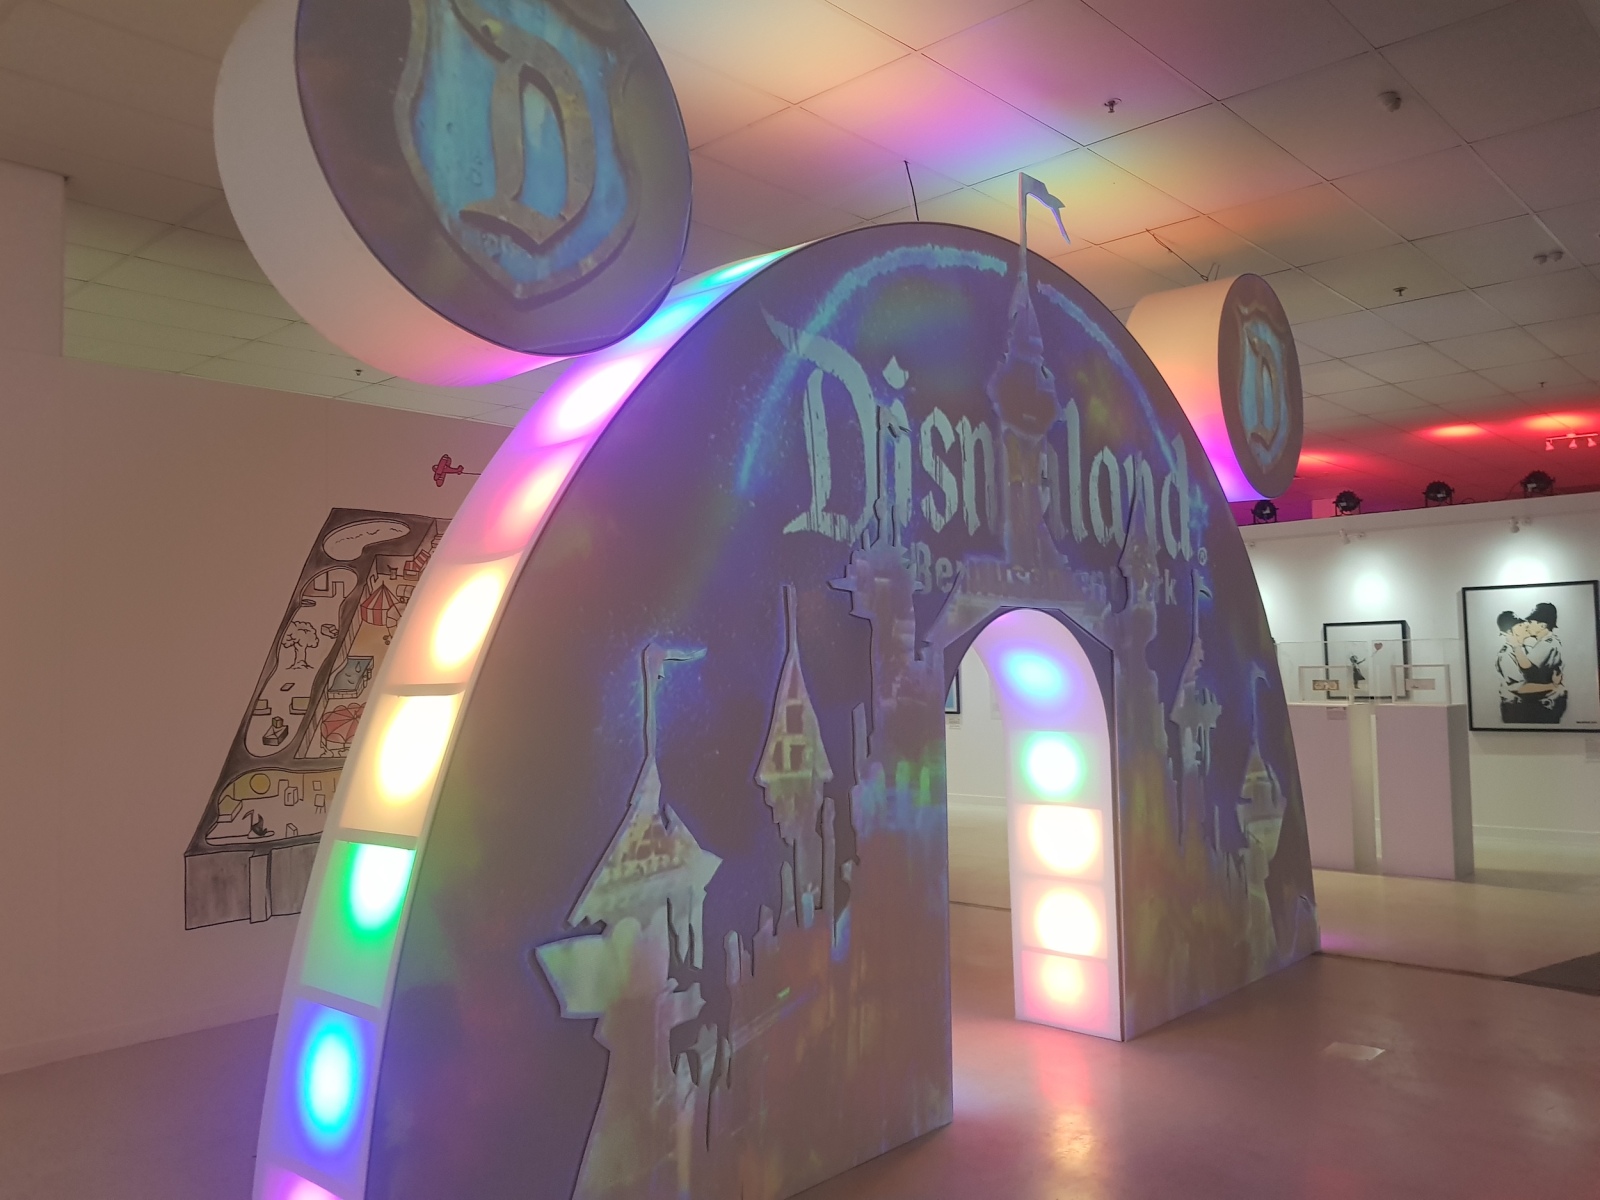 Front facing photo of a large archway reminiscent of Mickey Mouse’s ears in shape, has a projection of an edited Disney castle logo. Its sides are lit with multi-coloured LED lights.